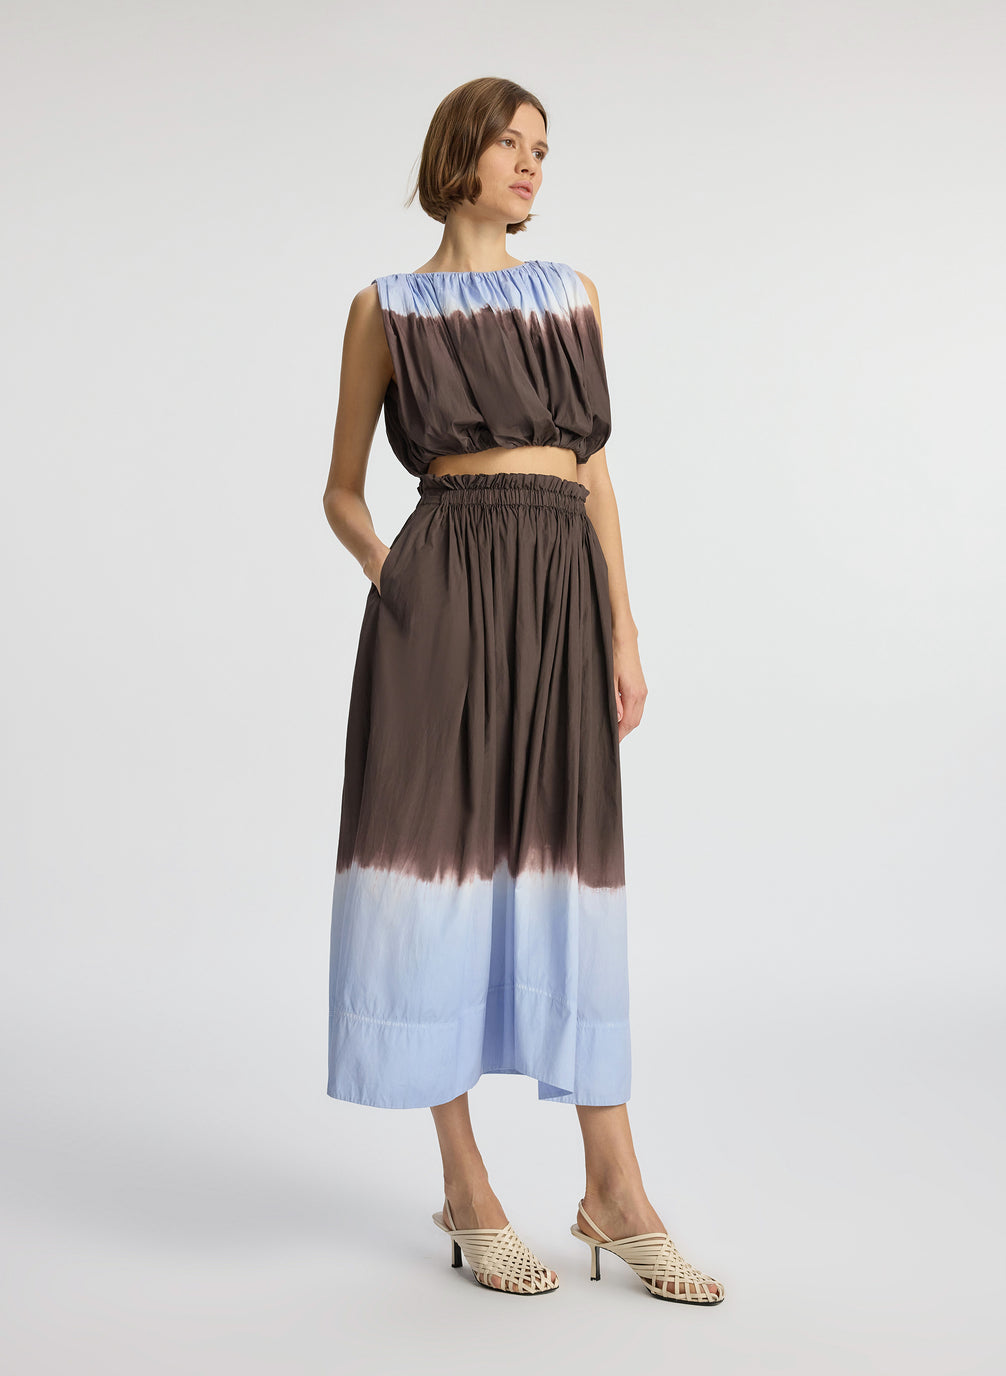 side view of woman wearing light blue and brown dip dyed sleeveless top and matching midi skirt